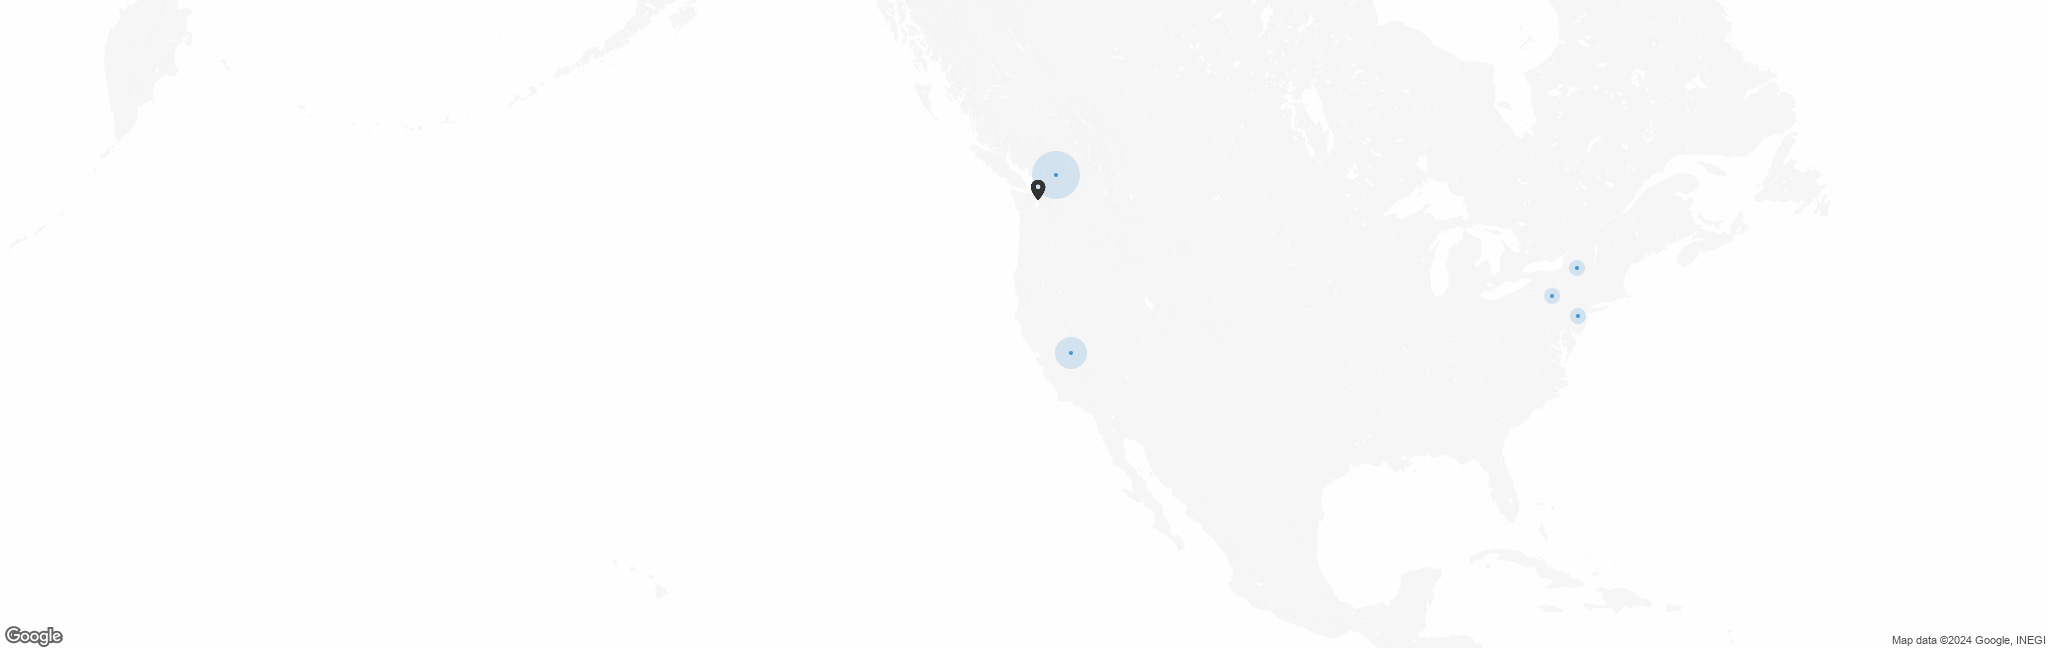 Map of US with pin of Orca Conservancy location